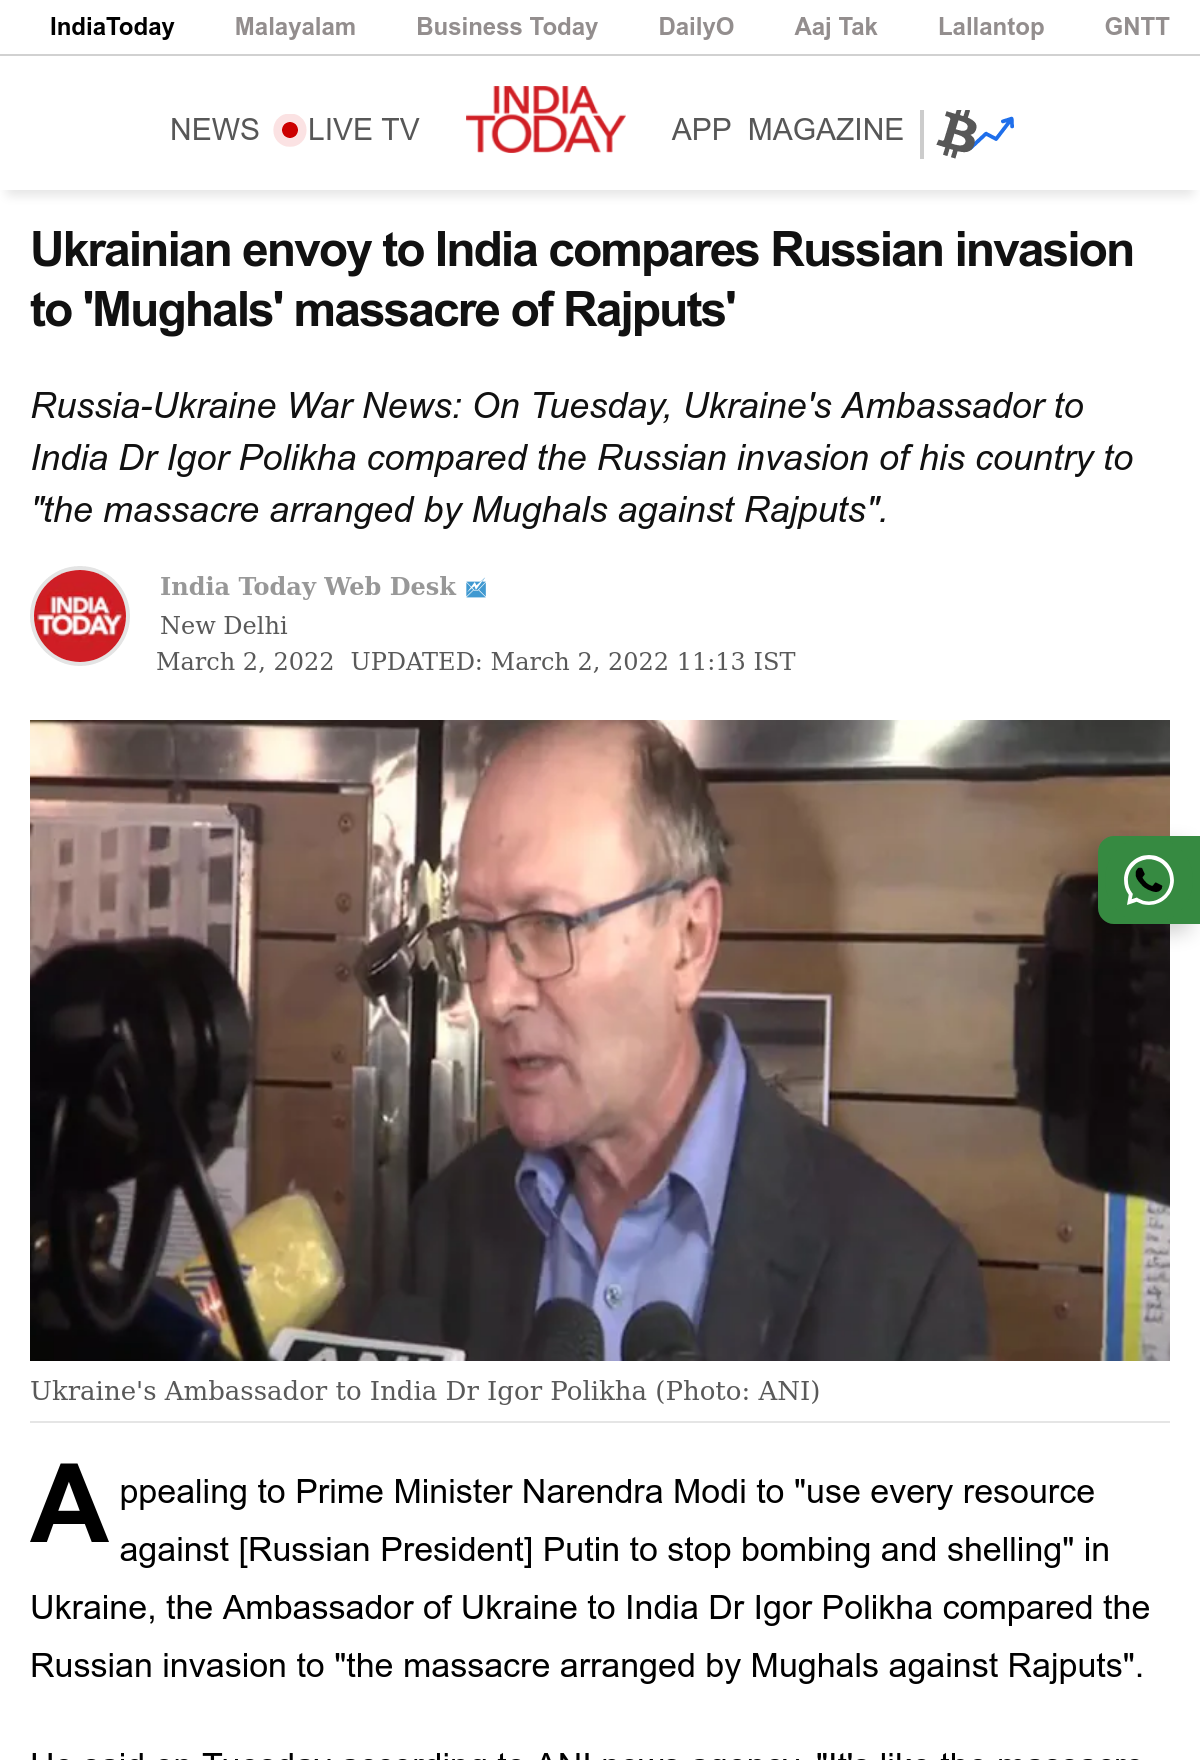 India Today - Ukraine envoy compares Russian Invasion to Mughals massacre of Rajputs